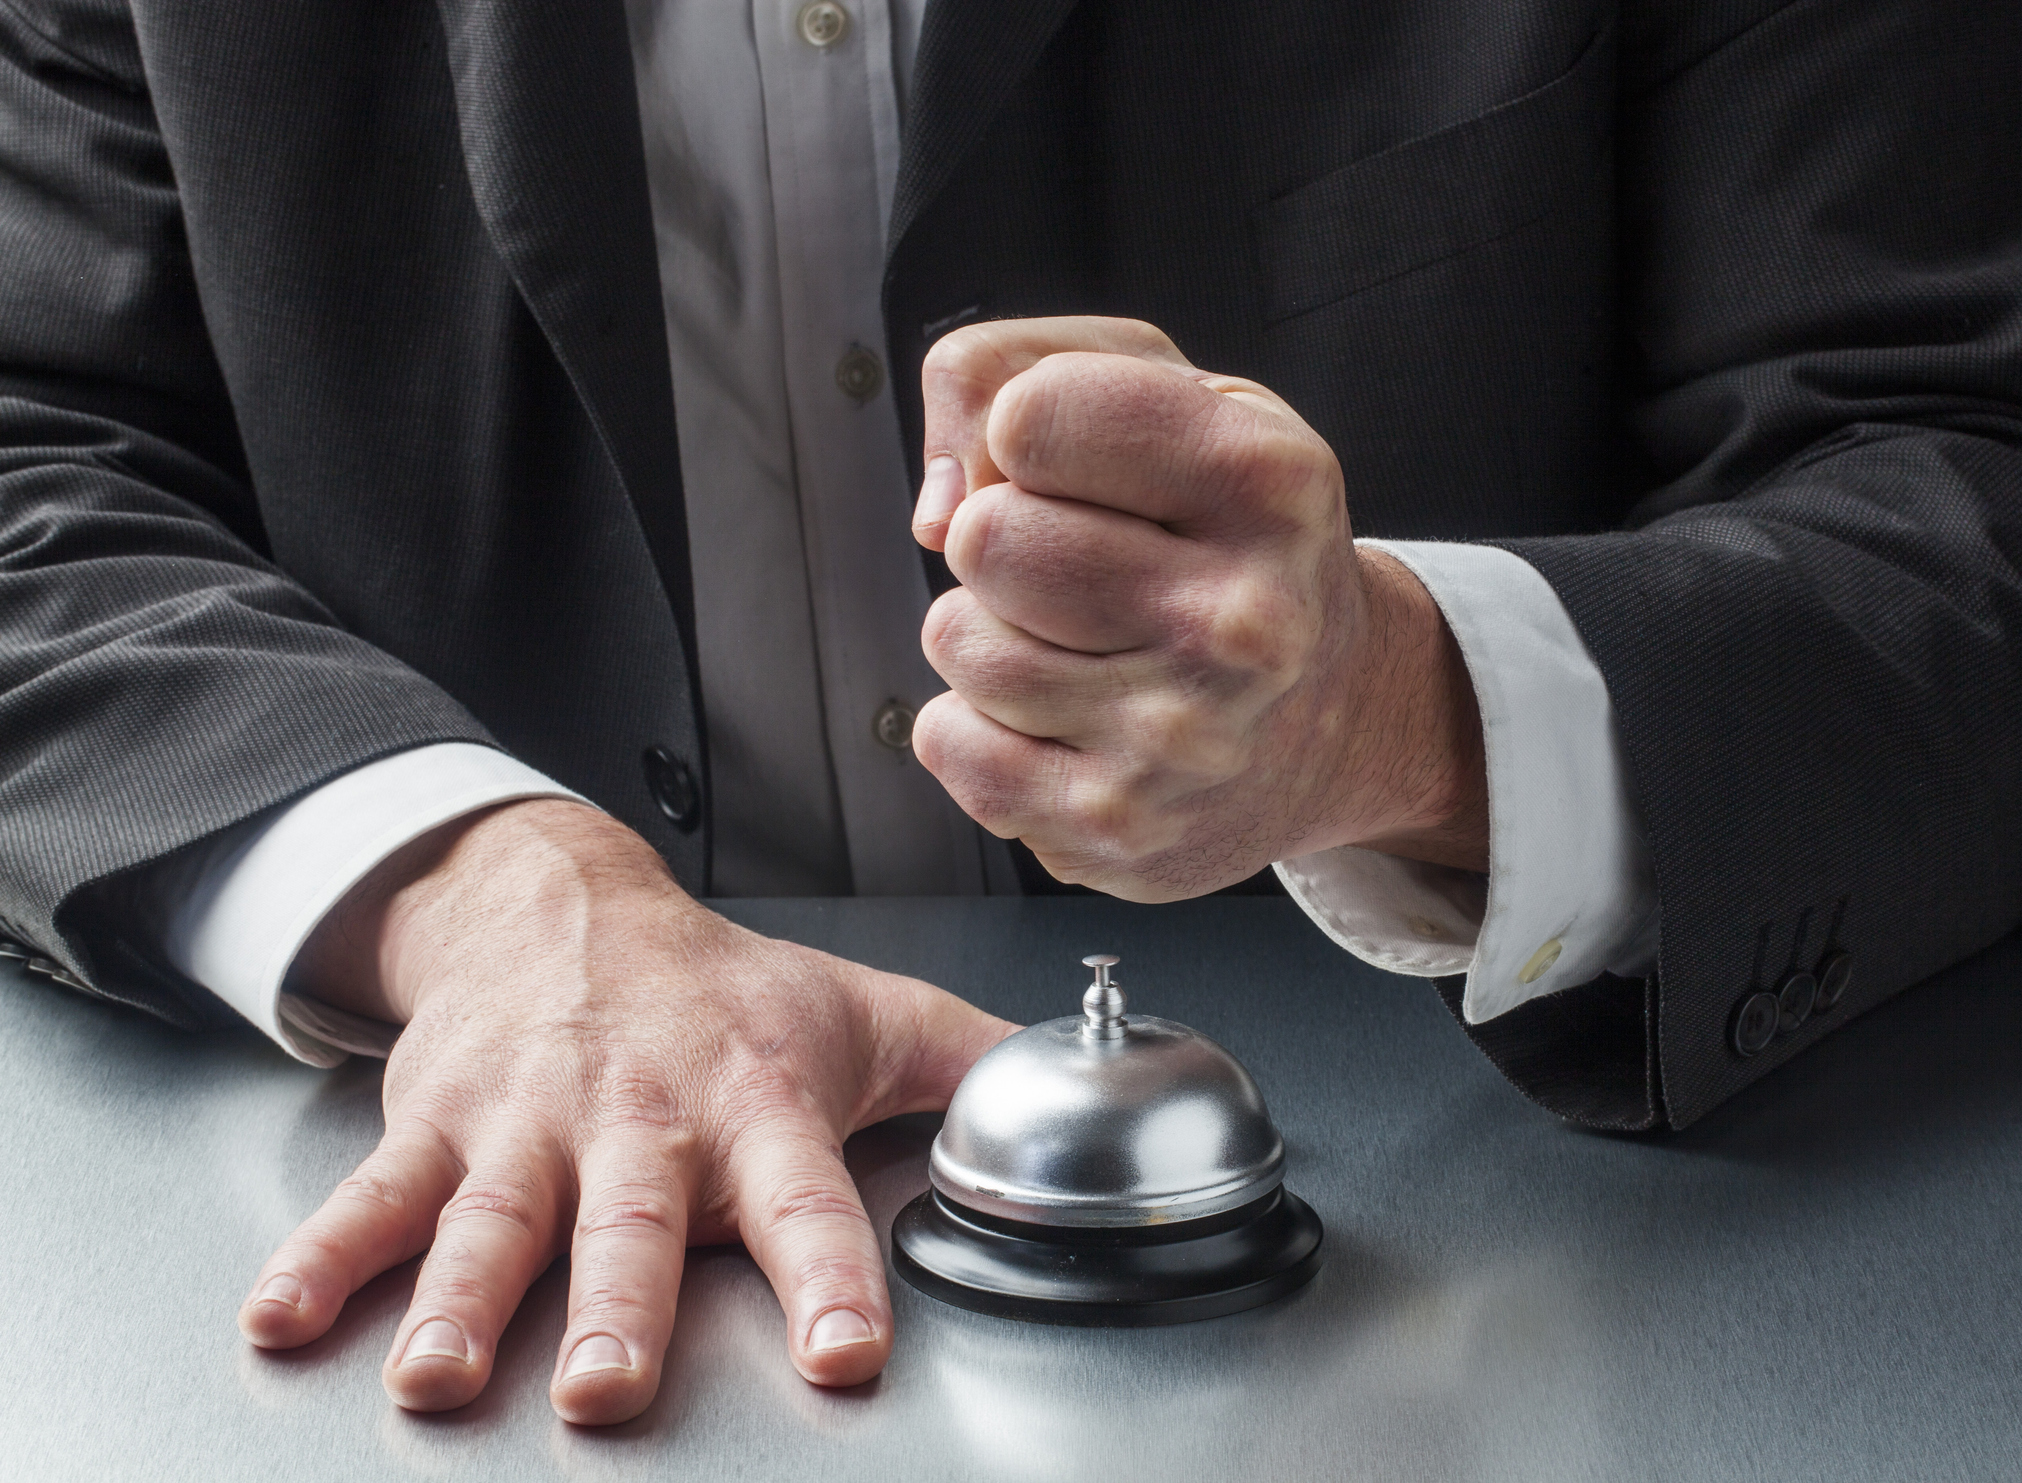 man in suit bringing down fist on service bell